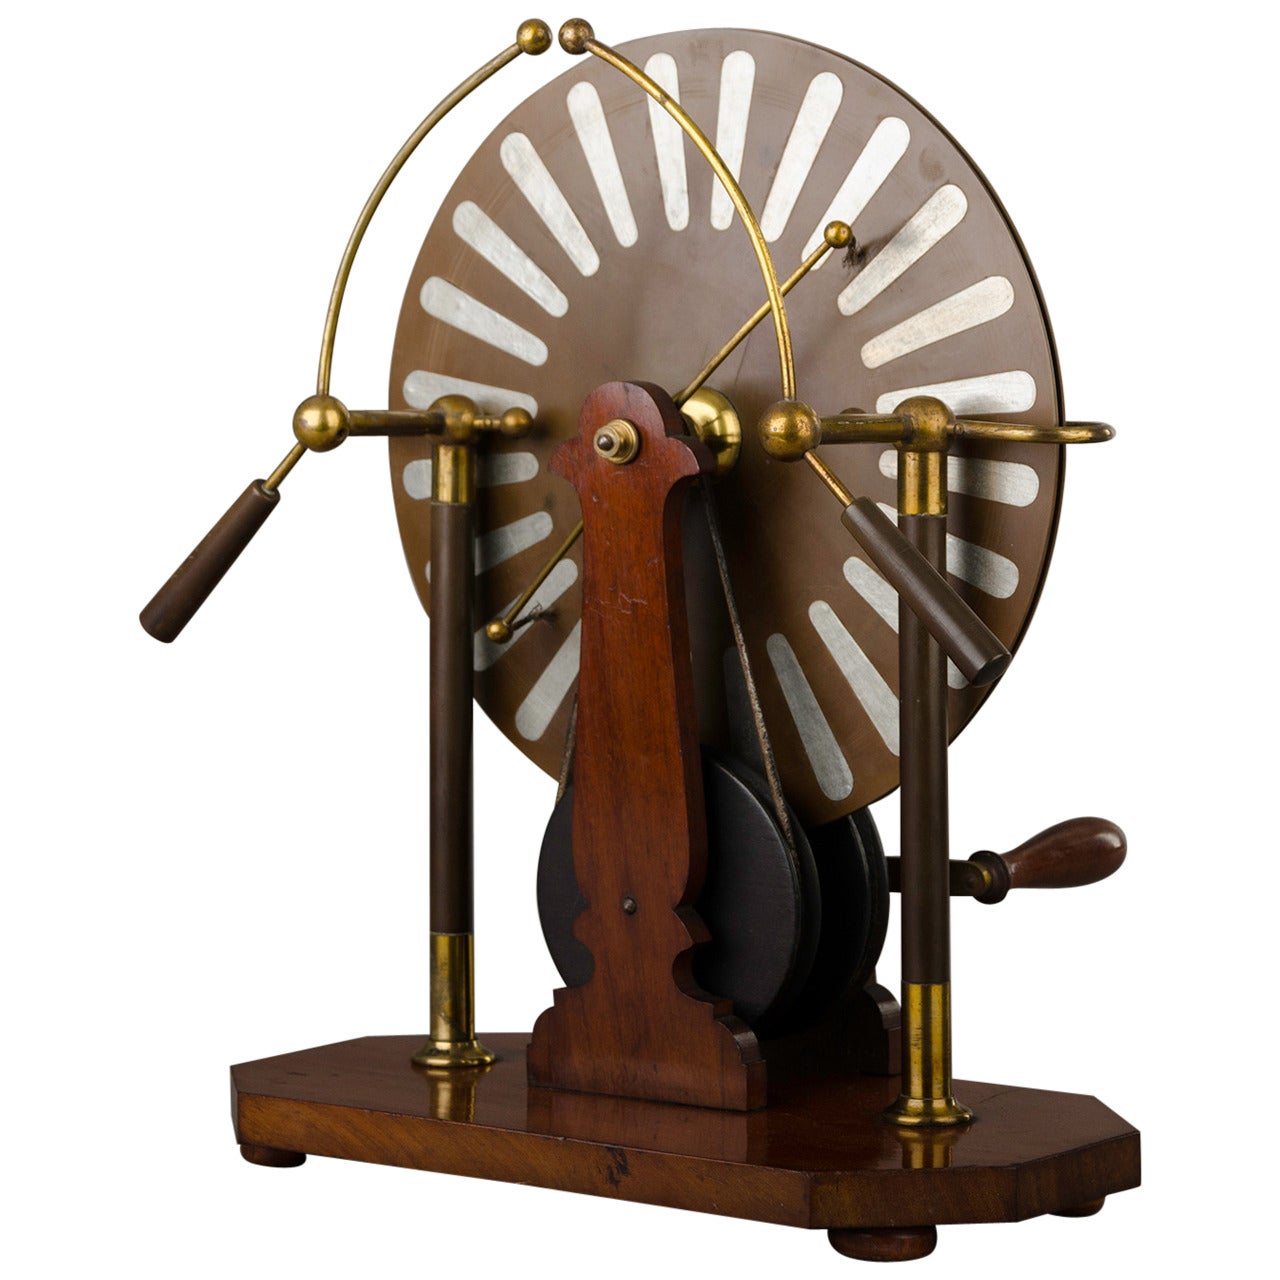 Wimshurts Machine, End of 19th Century